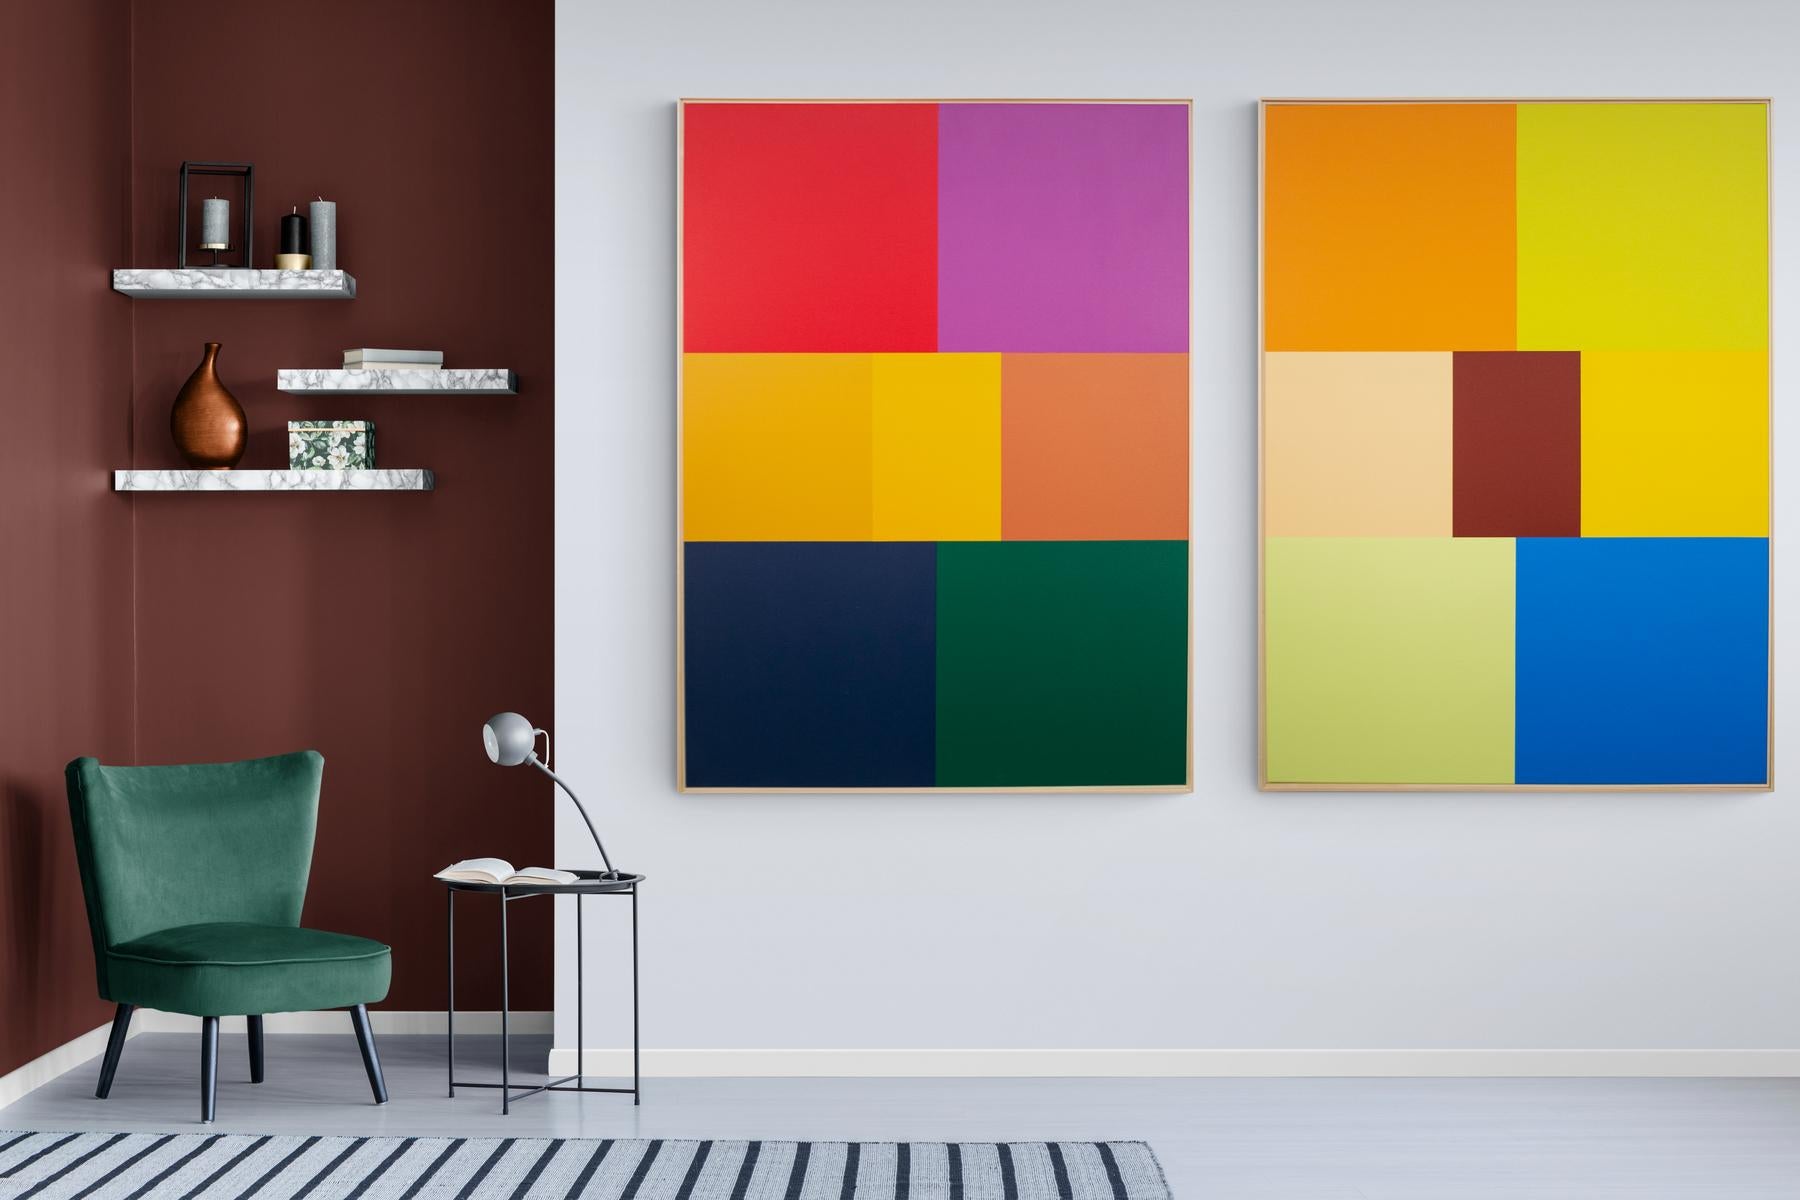 Proposition (Set of Four) - large, colourful, abstract, acrylic on canvas - Painting by Milly Ristvedt